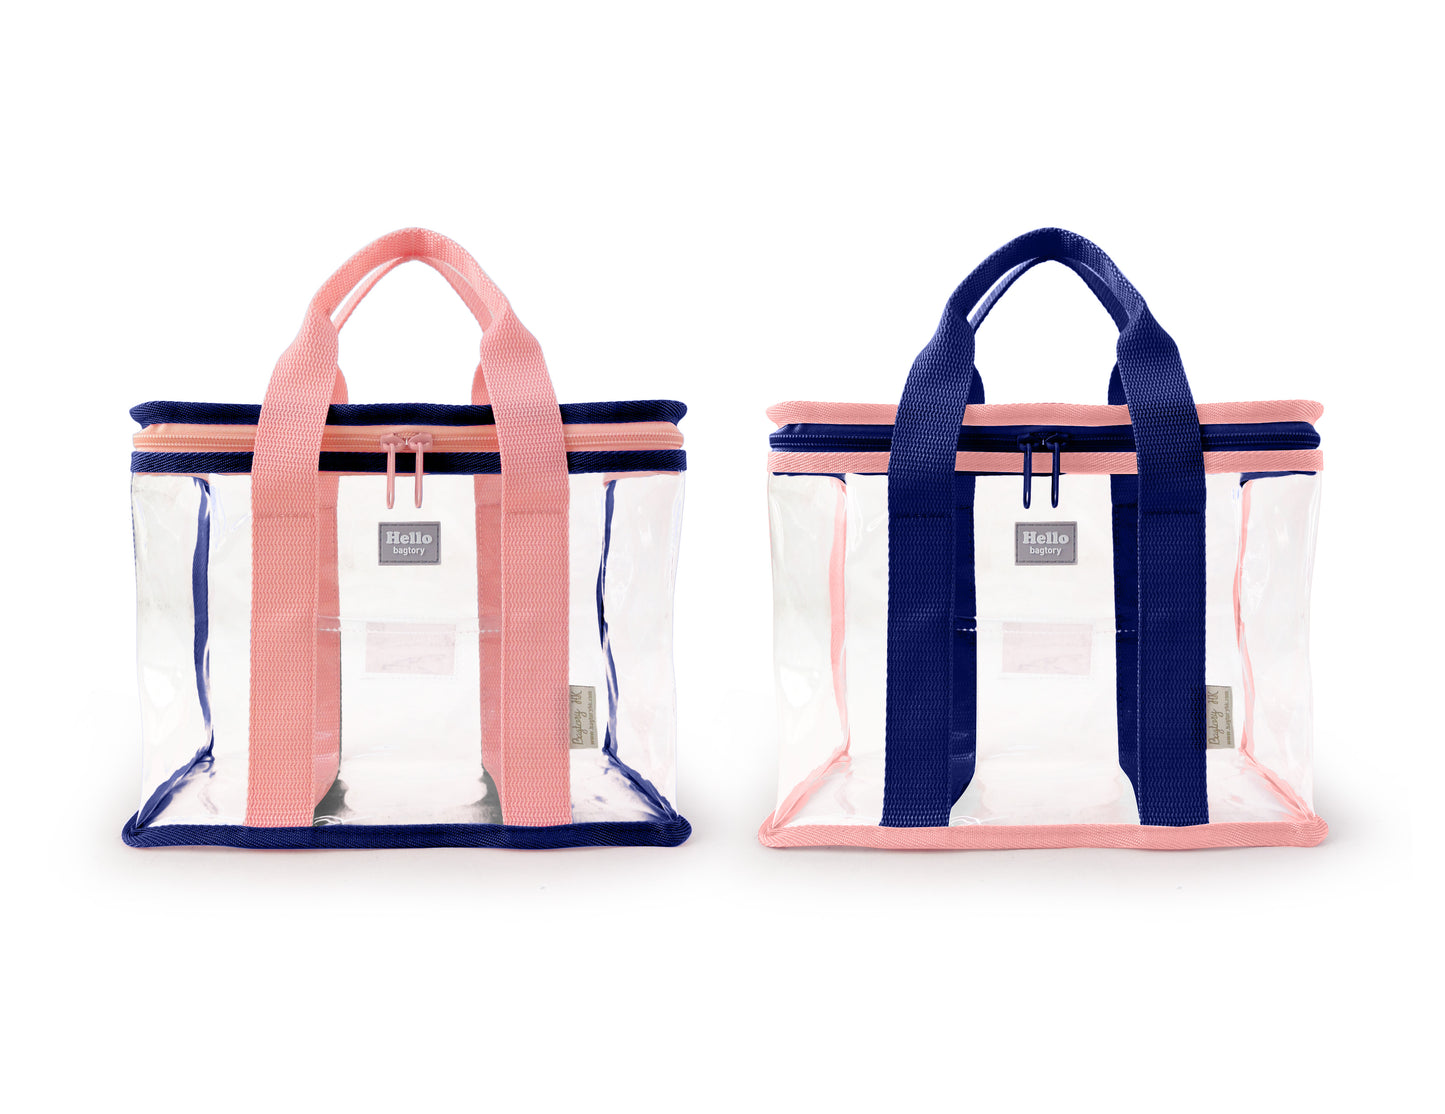 Hello Boxy lunch bag | Small tote bag (BX) | Transparent & clear HD PVC storage bag